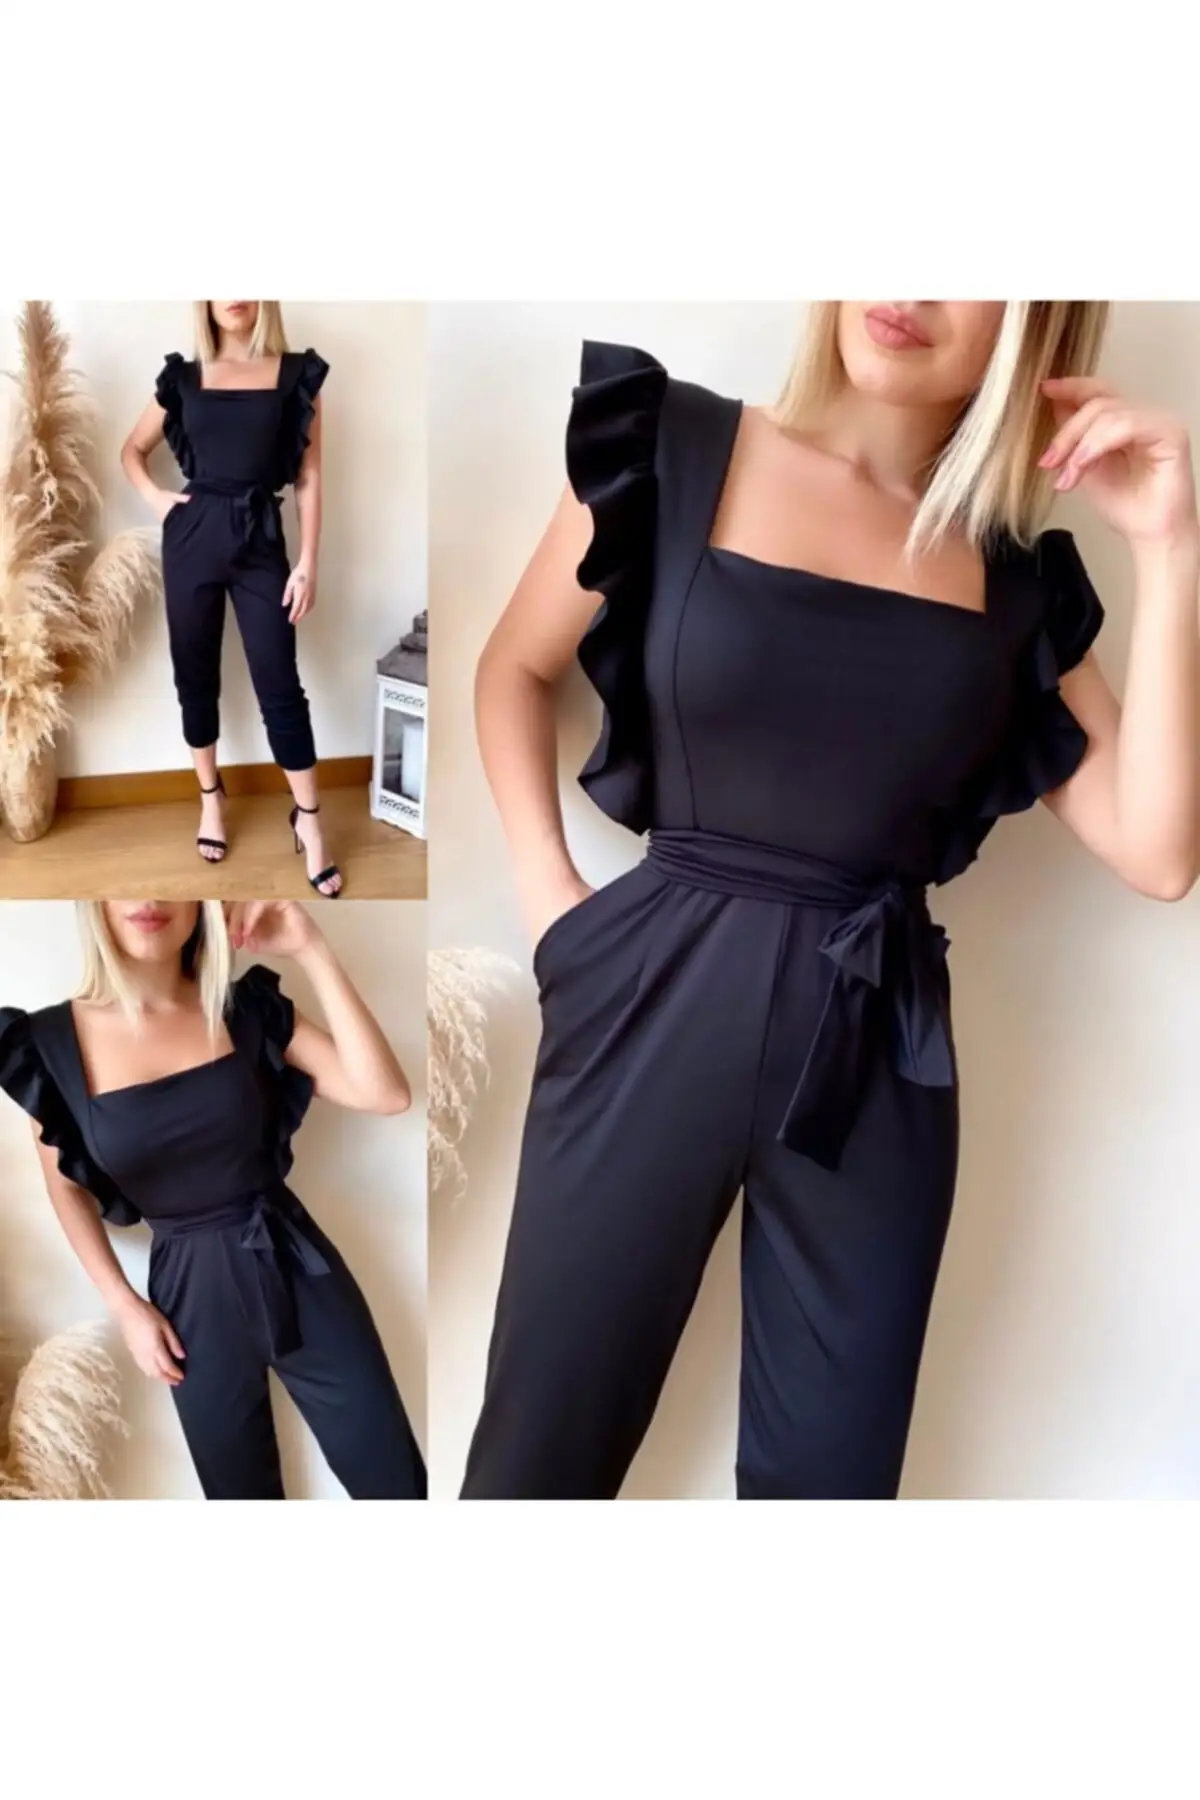 

Women's Overalls Black Frill And Belt Detailed Sports Dress Hot Casual Fashion Sleeveless Baggy Trousers Overalls